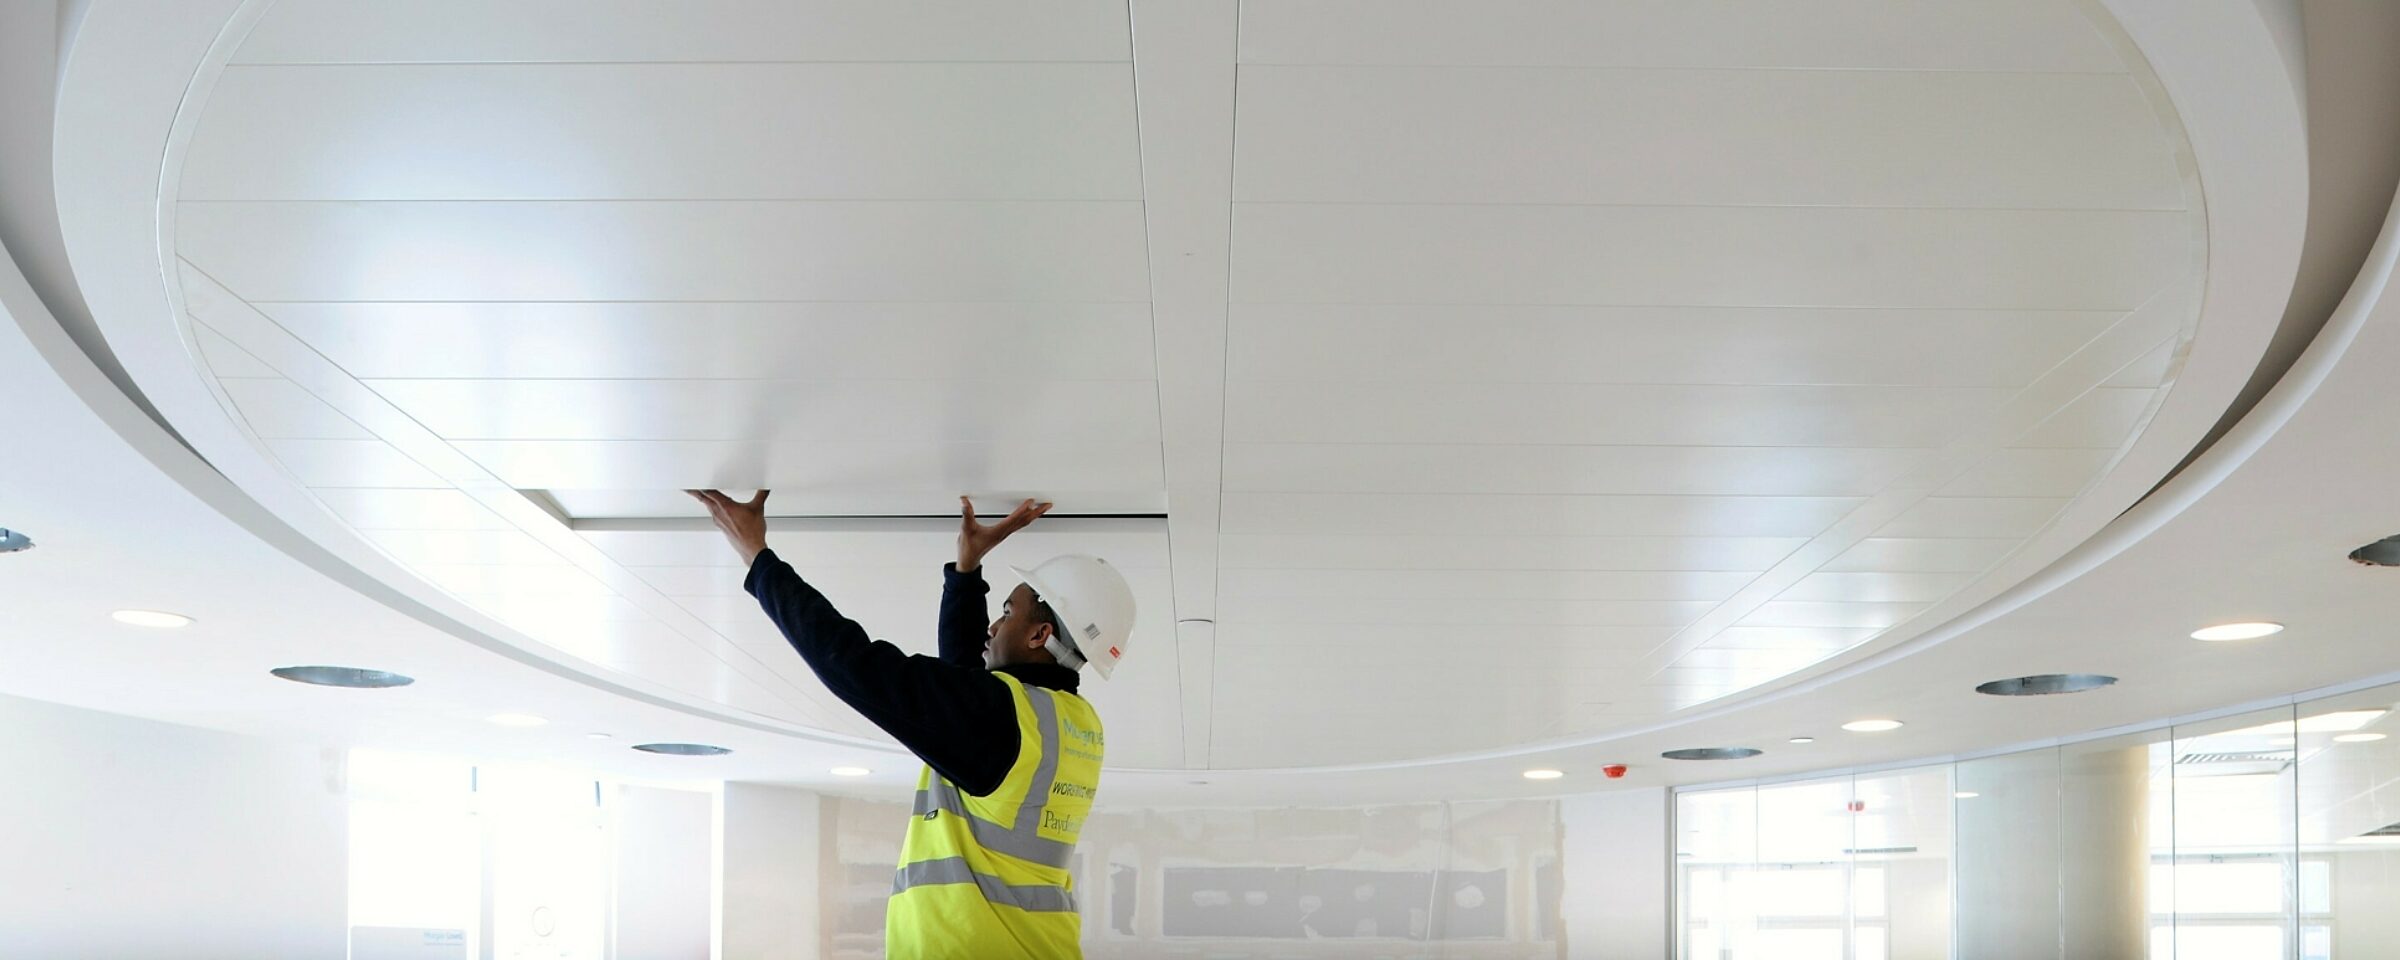 A man in health and safety gear working on the ceiling onsite.